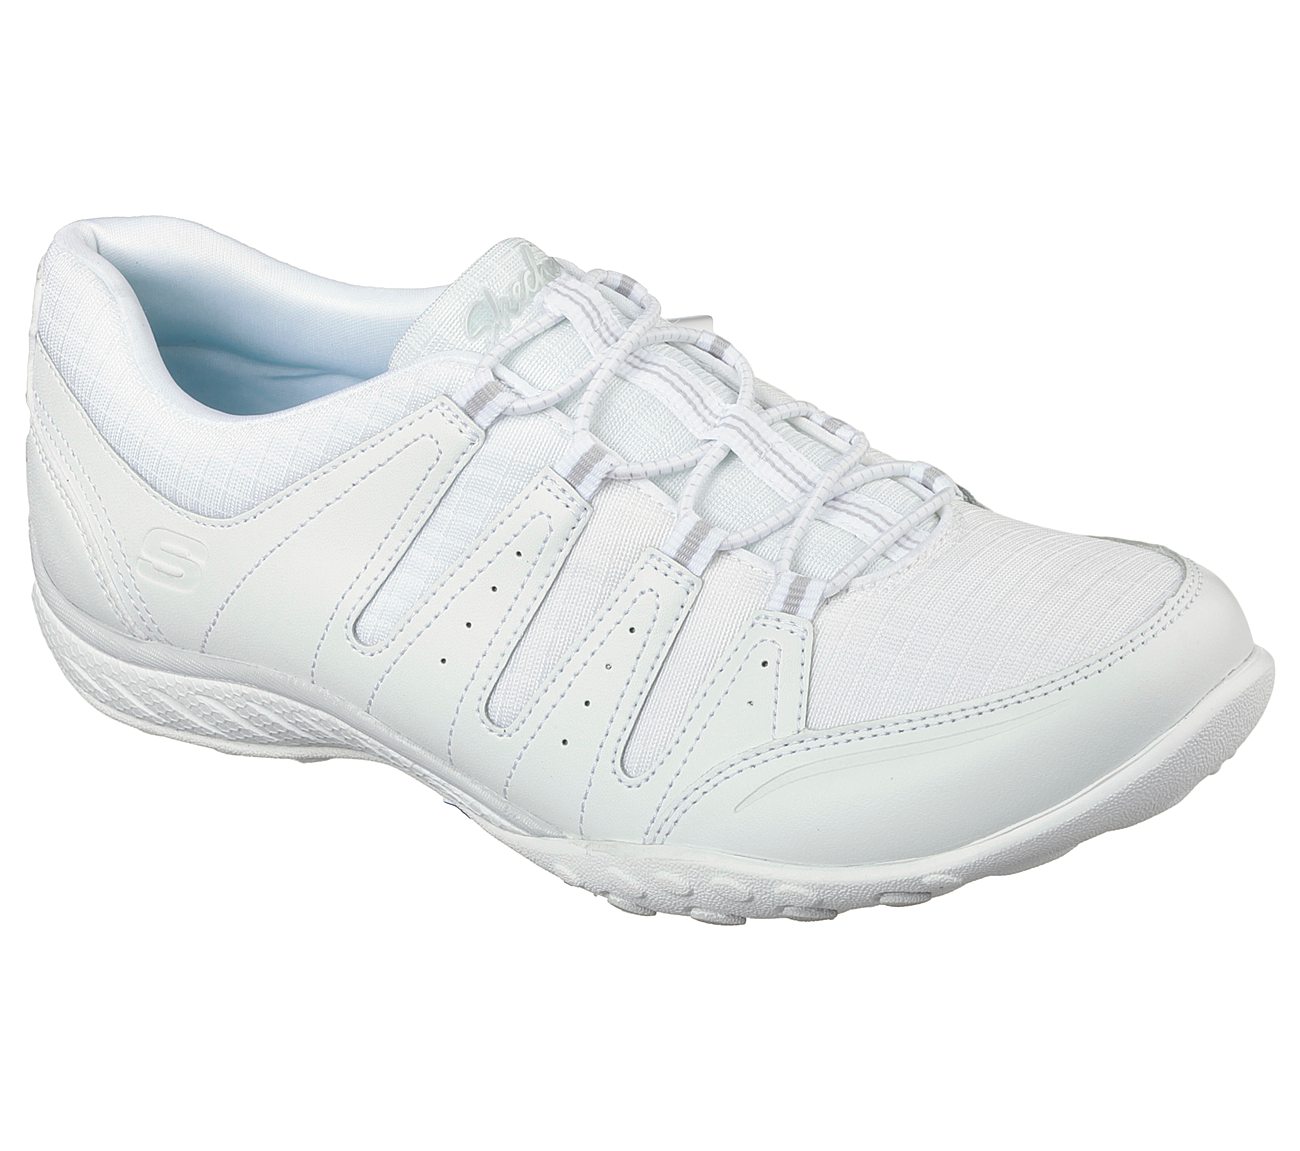 Buy SKECHERS Relaxed Fit: Breathe Easy - Imagine Active Shoes only $65.00